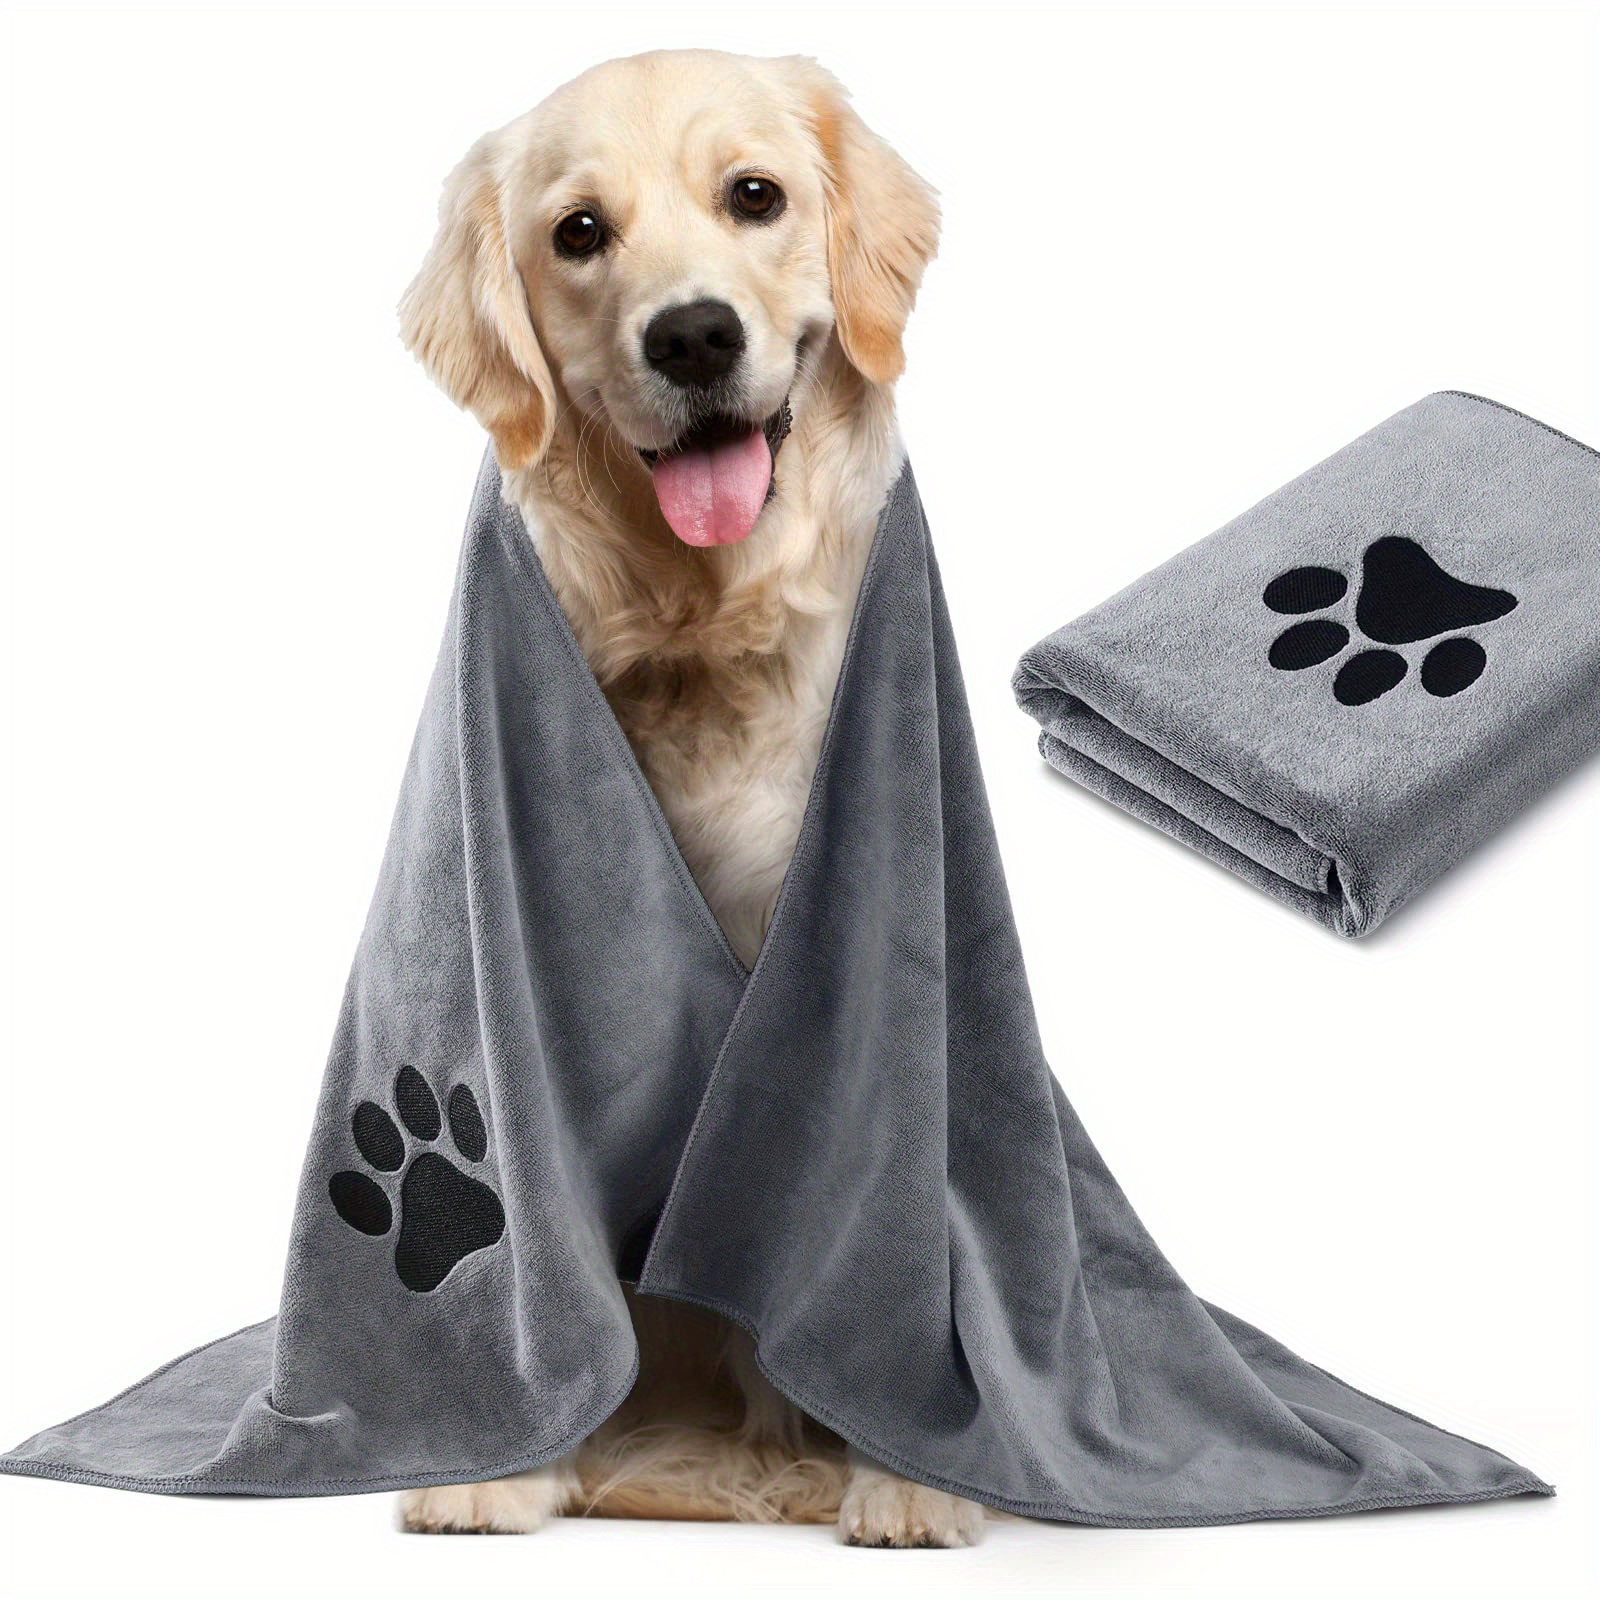 

1 Pack Dog Towel, Super Absorbent Pet Grooming Towel, Soft Microfiber Quick Drying Towel, Pet Bath Shower Towel For Dogs And Cats